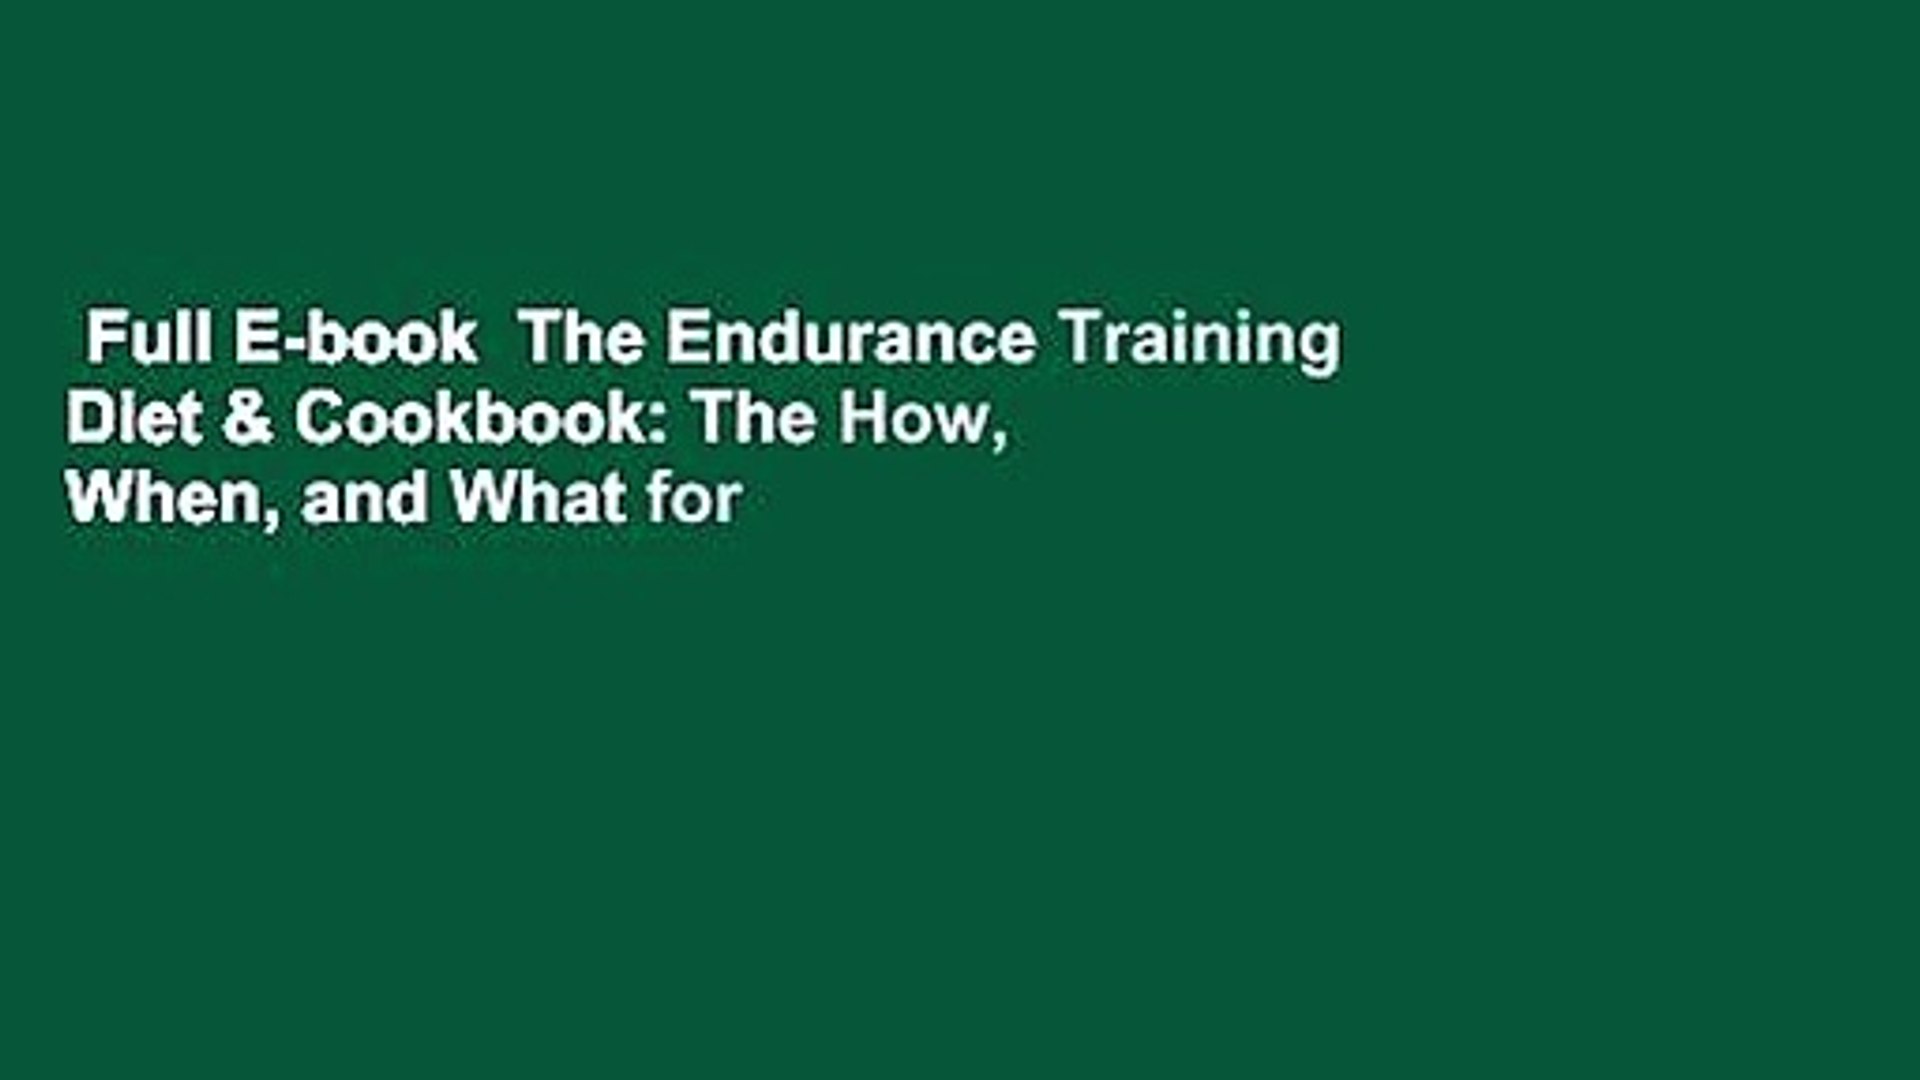 Træ sig selv klatre Full E-book The Endurance Training Diet & Cookbook: The How, When, and What  for Fueling Runners - video Dailymotion